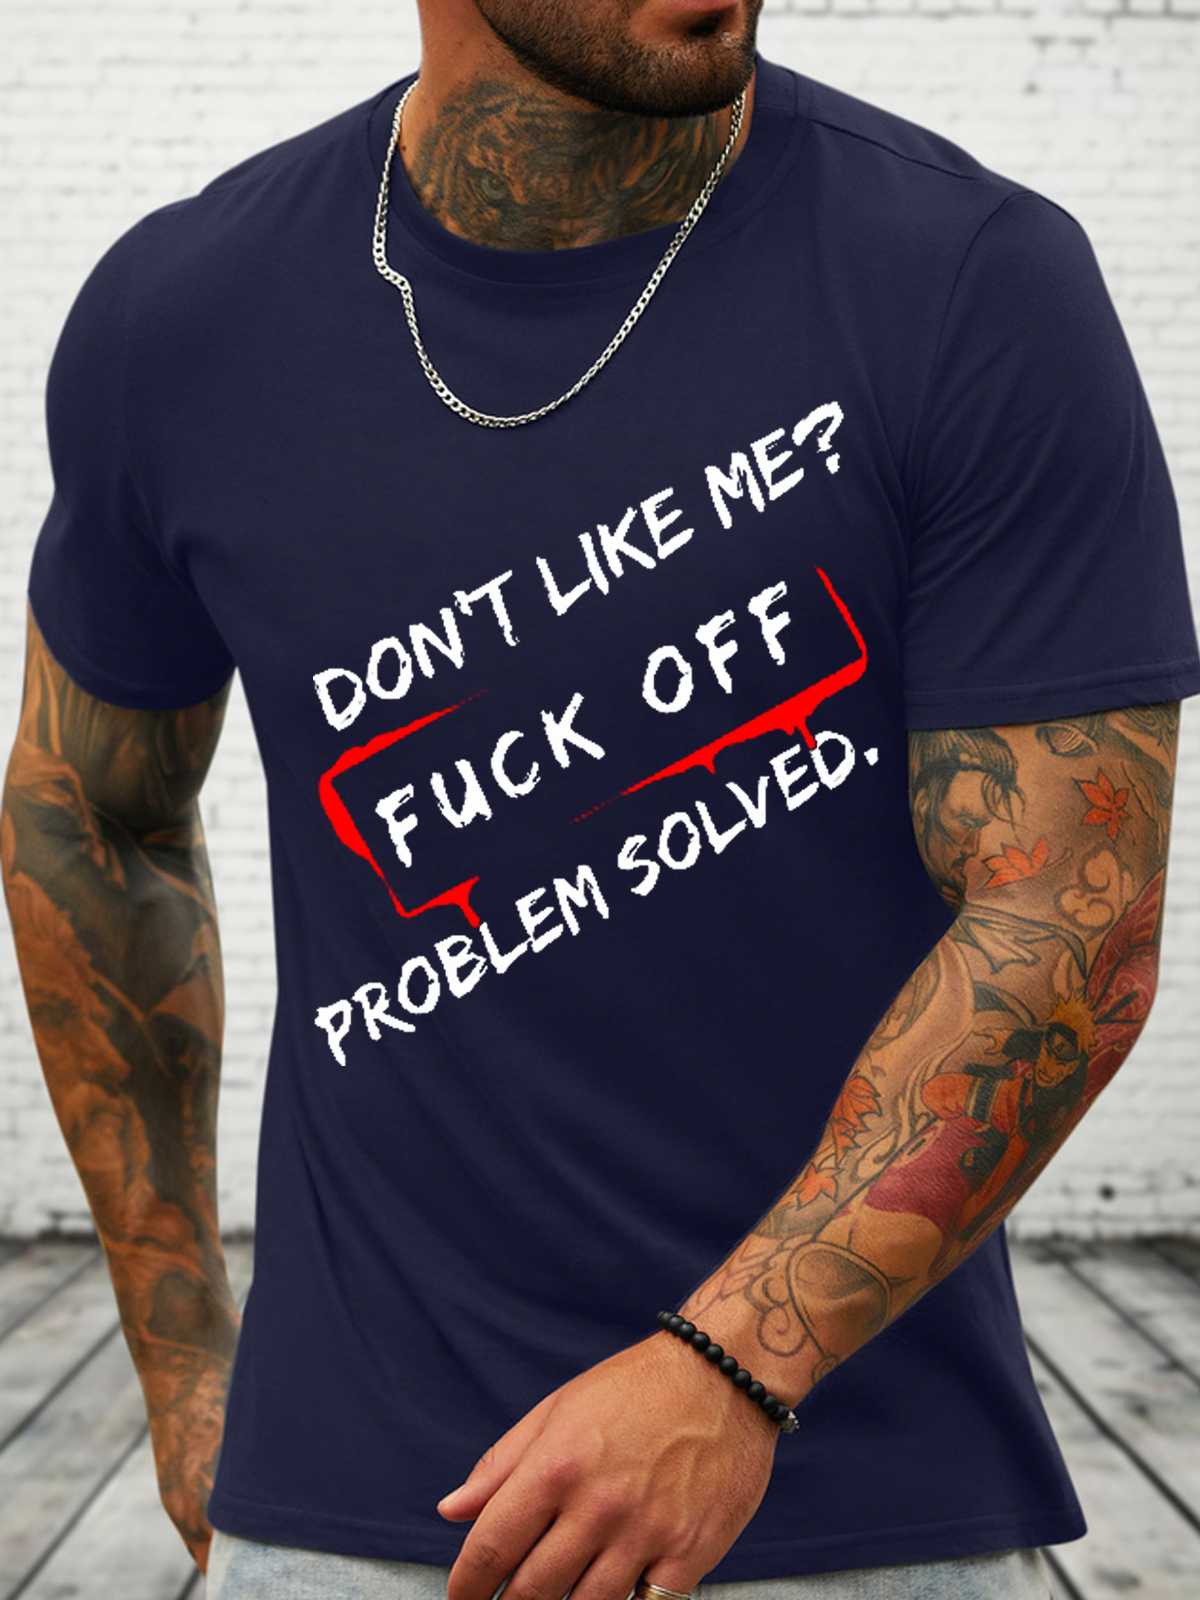 Cotton Don't Like Me? Printed Men's Text Letters Casual Crew Neck T-Shirt